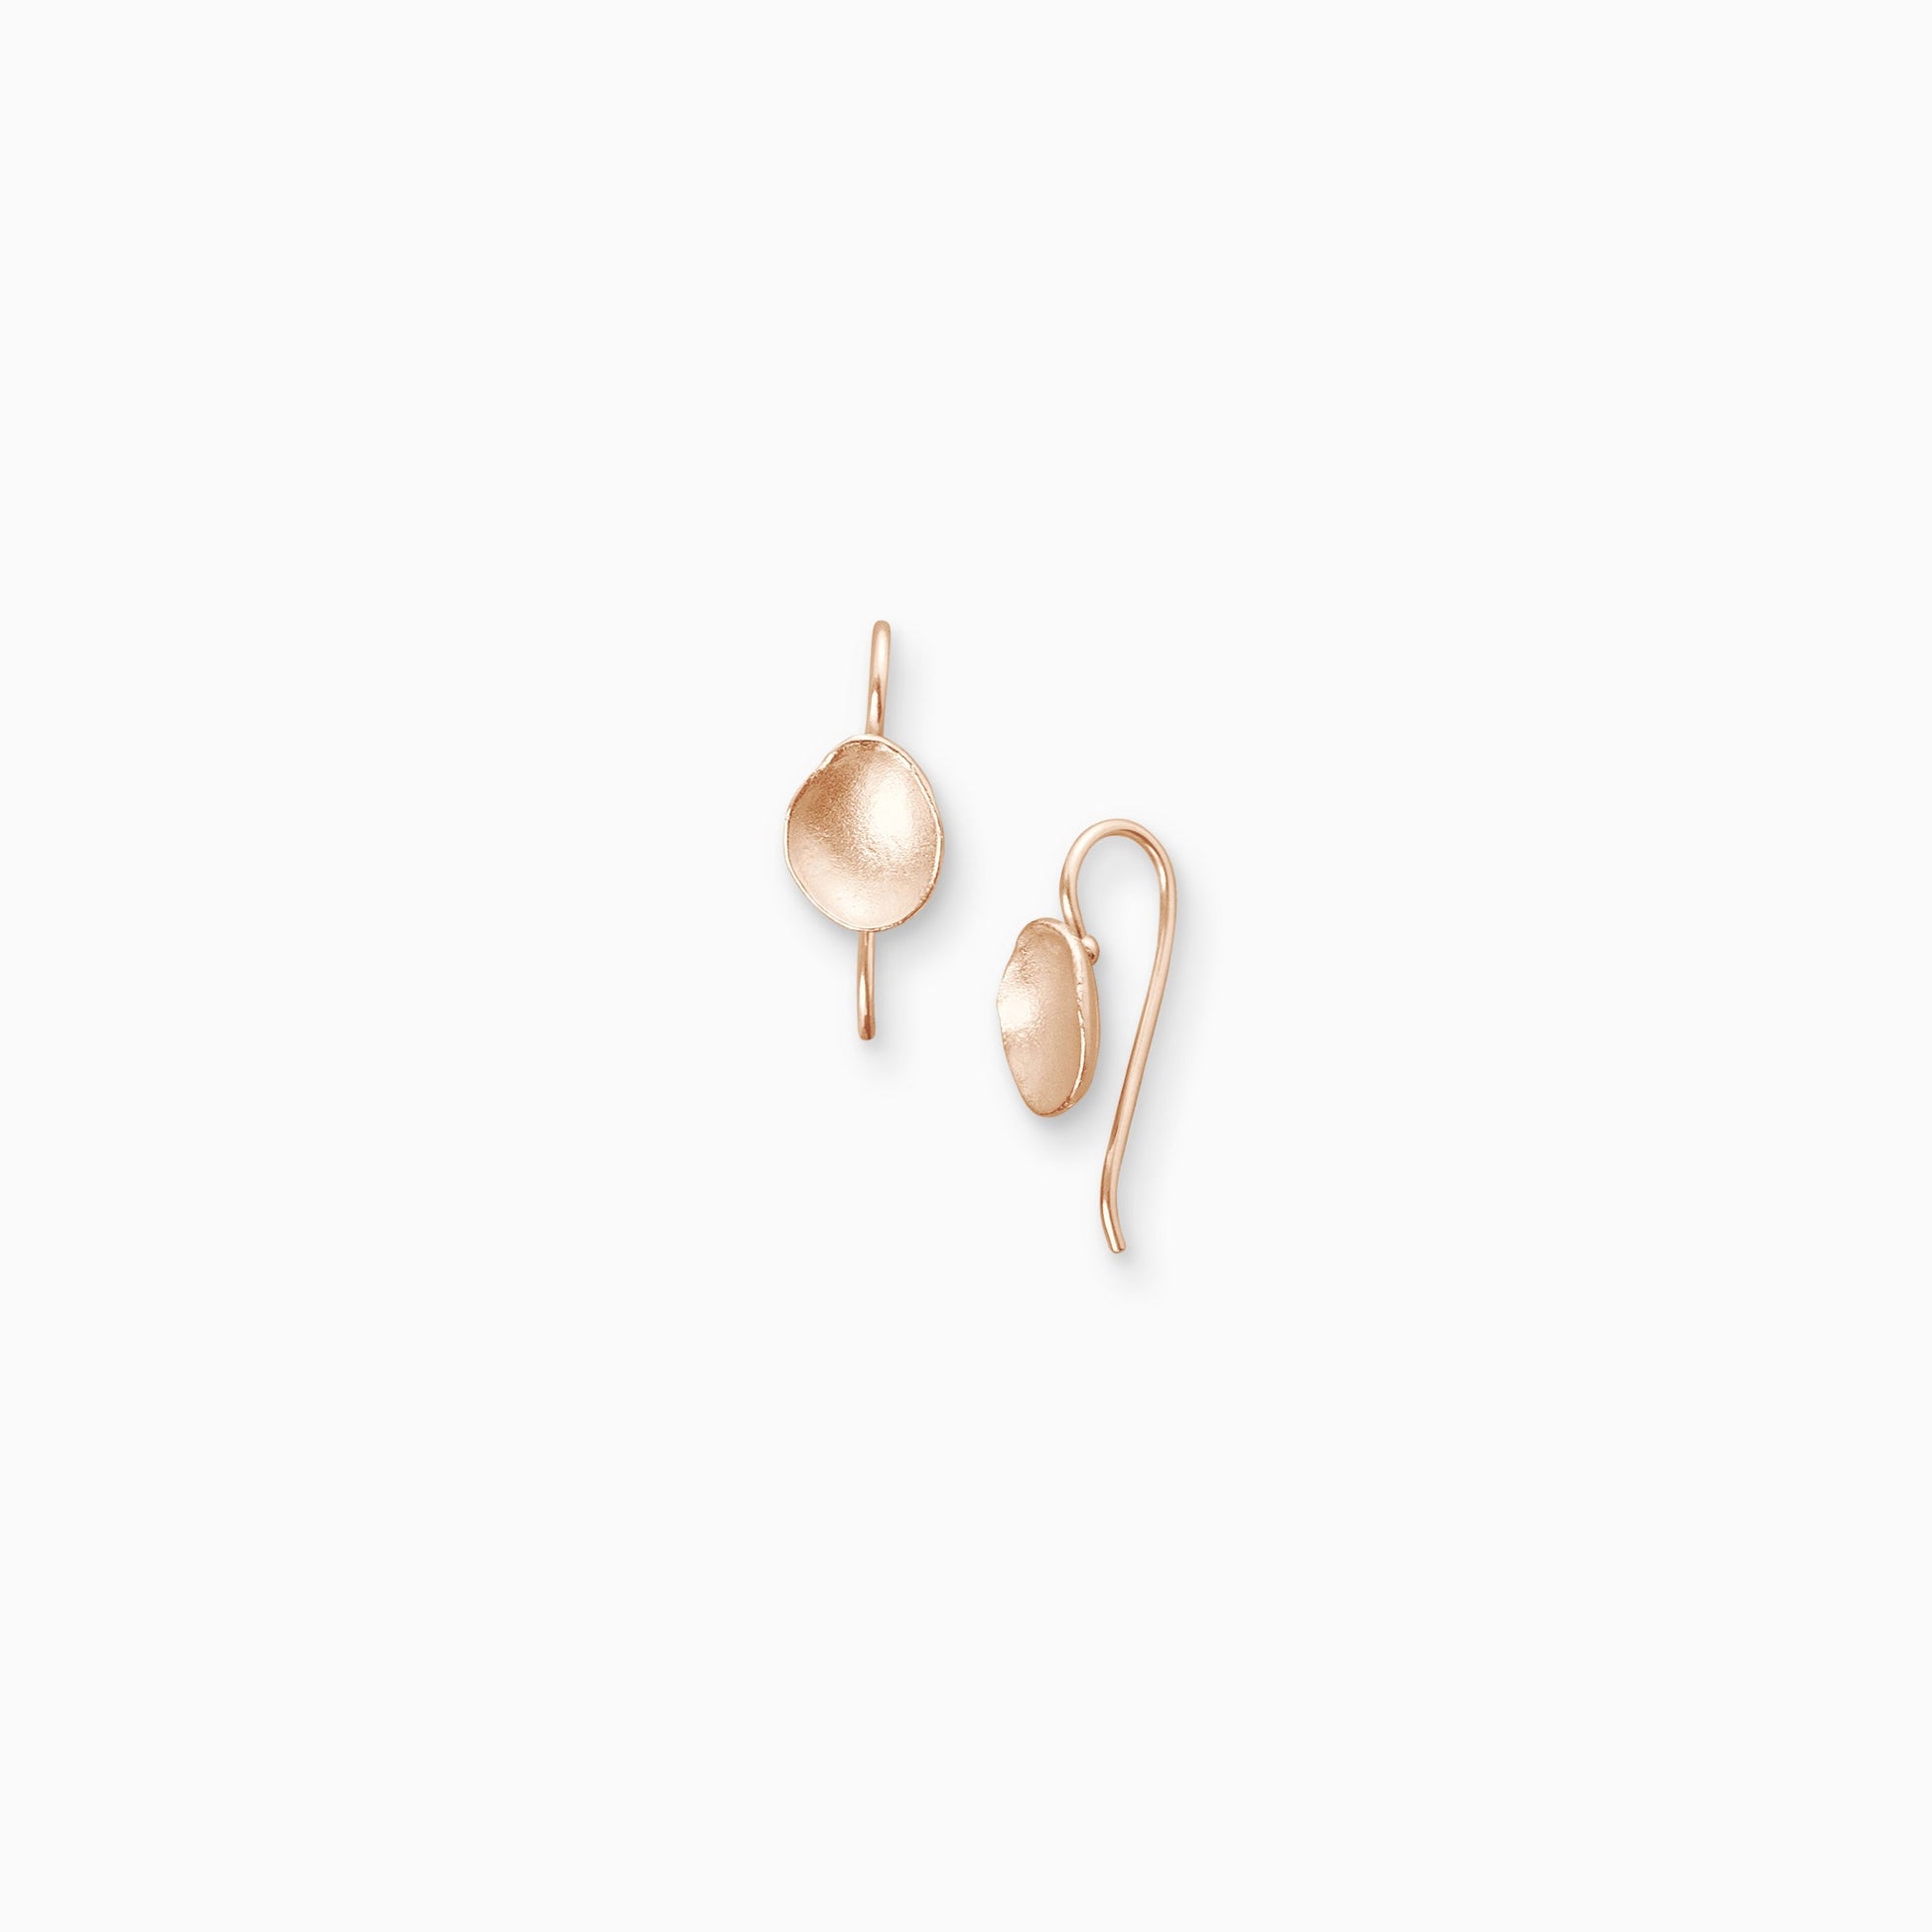 A pair of 18ct Fairtrade rose gold small concave oval shaped earrings with hook fastening. Satin finish. 20mm length, 8mm width